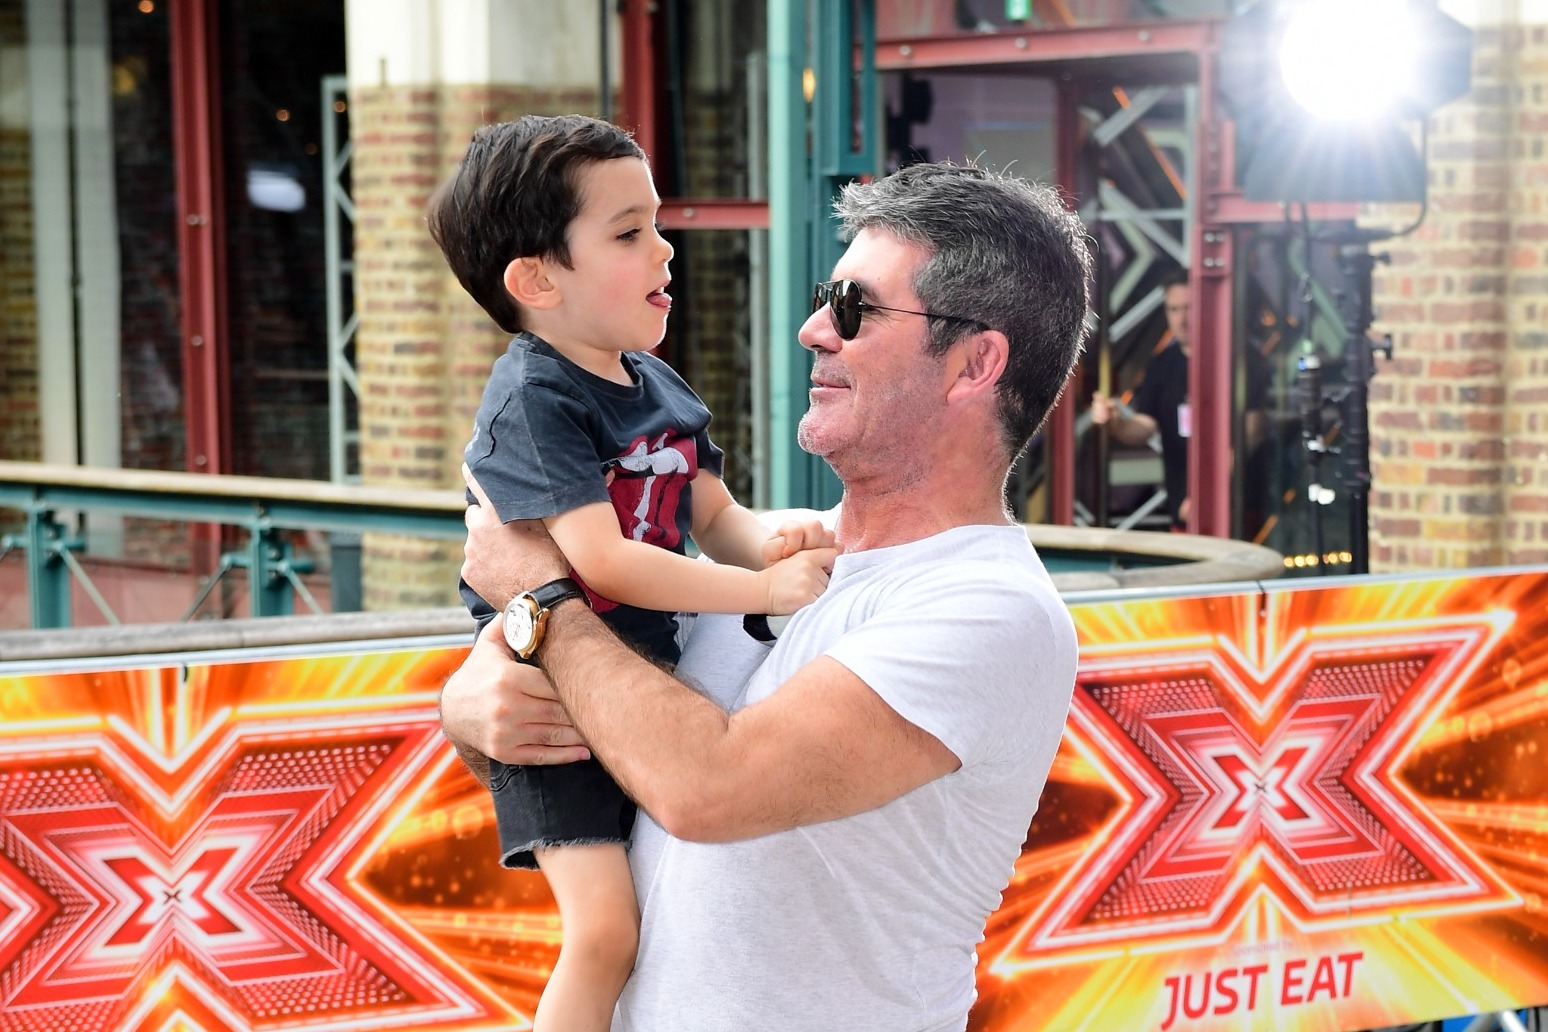 Simon Cowell says he was ‘really unhappy’ and a workaholic before becoming a dad 